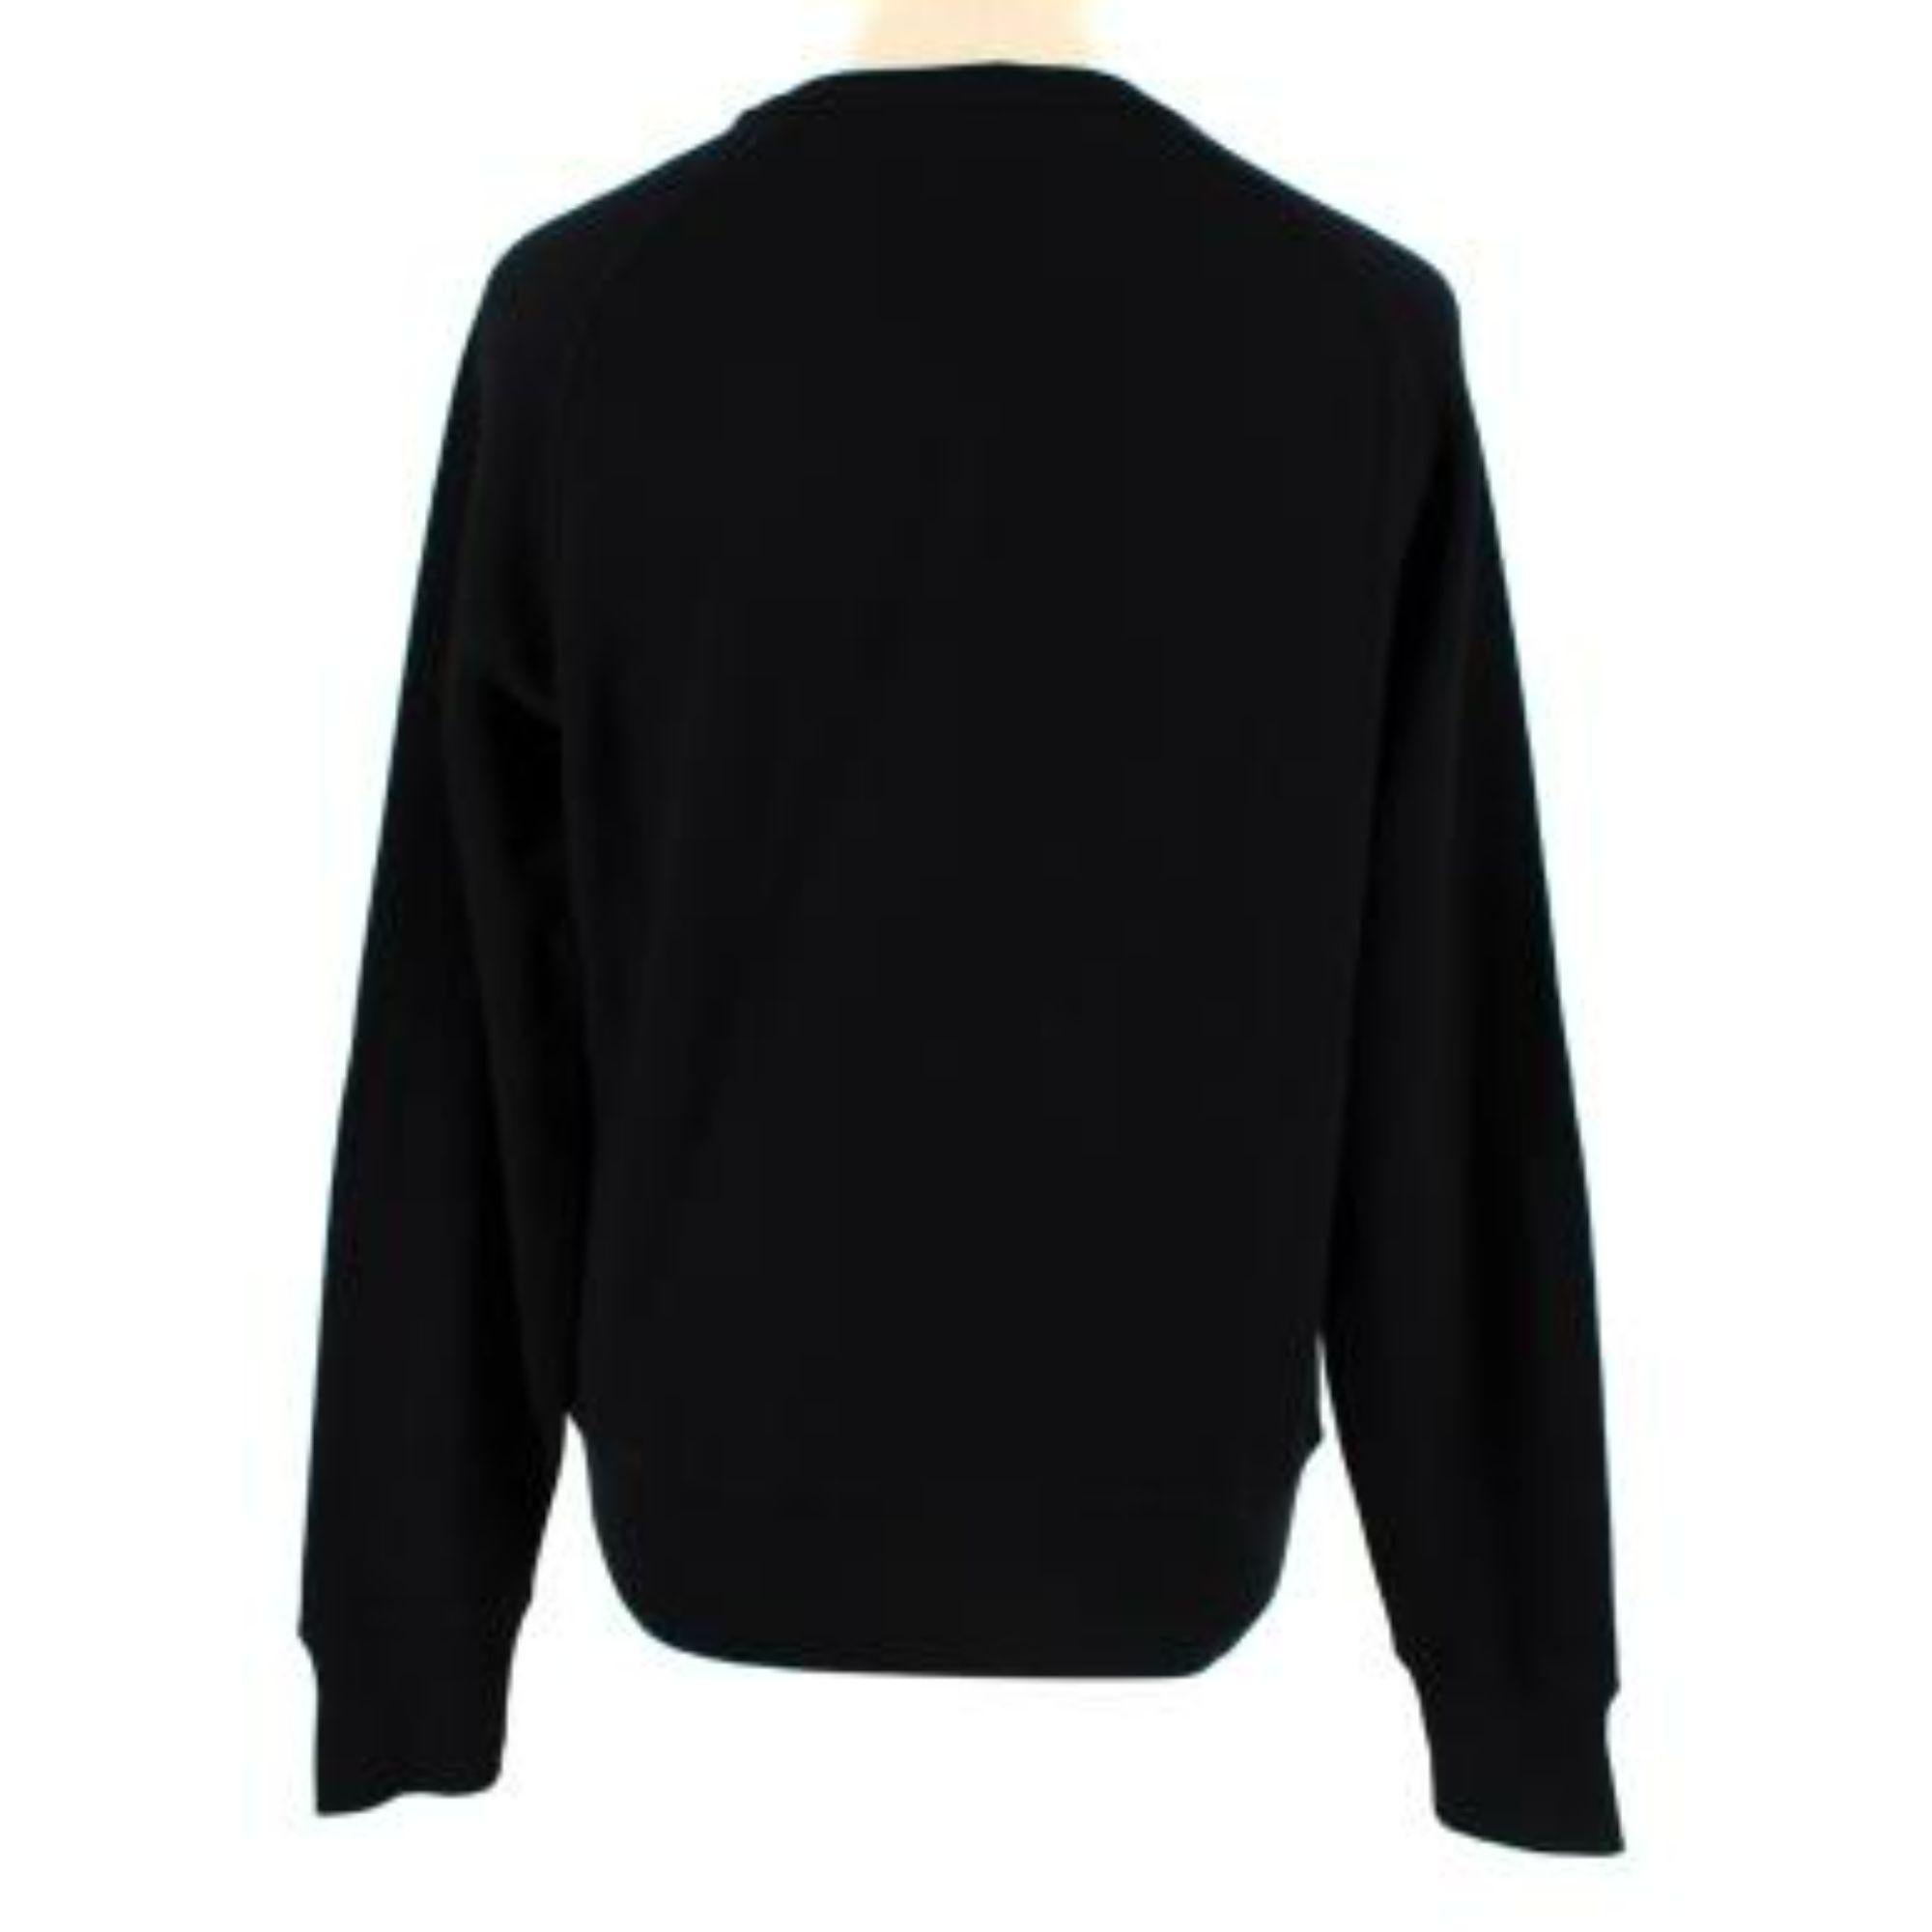 Tom Ford Black Crew Neck Jumper

- Black, soft cotton Tom Ford crewneck sweatshirt
- Ribbed trims on collar, hem and cuffs
- Grey inner lining

Materials:
99% Cotton
1% Polyamide

Made in Italy
Dry-clean only

9.5/10 excellent condition with no